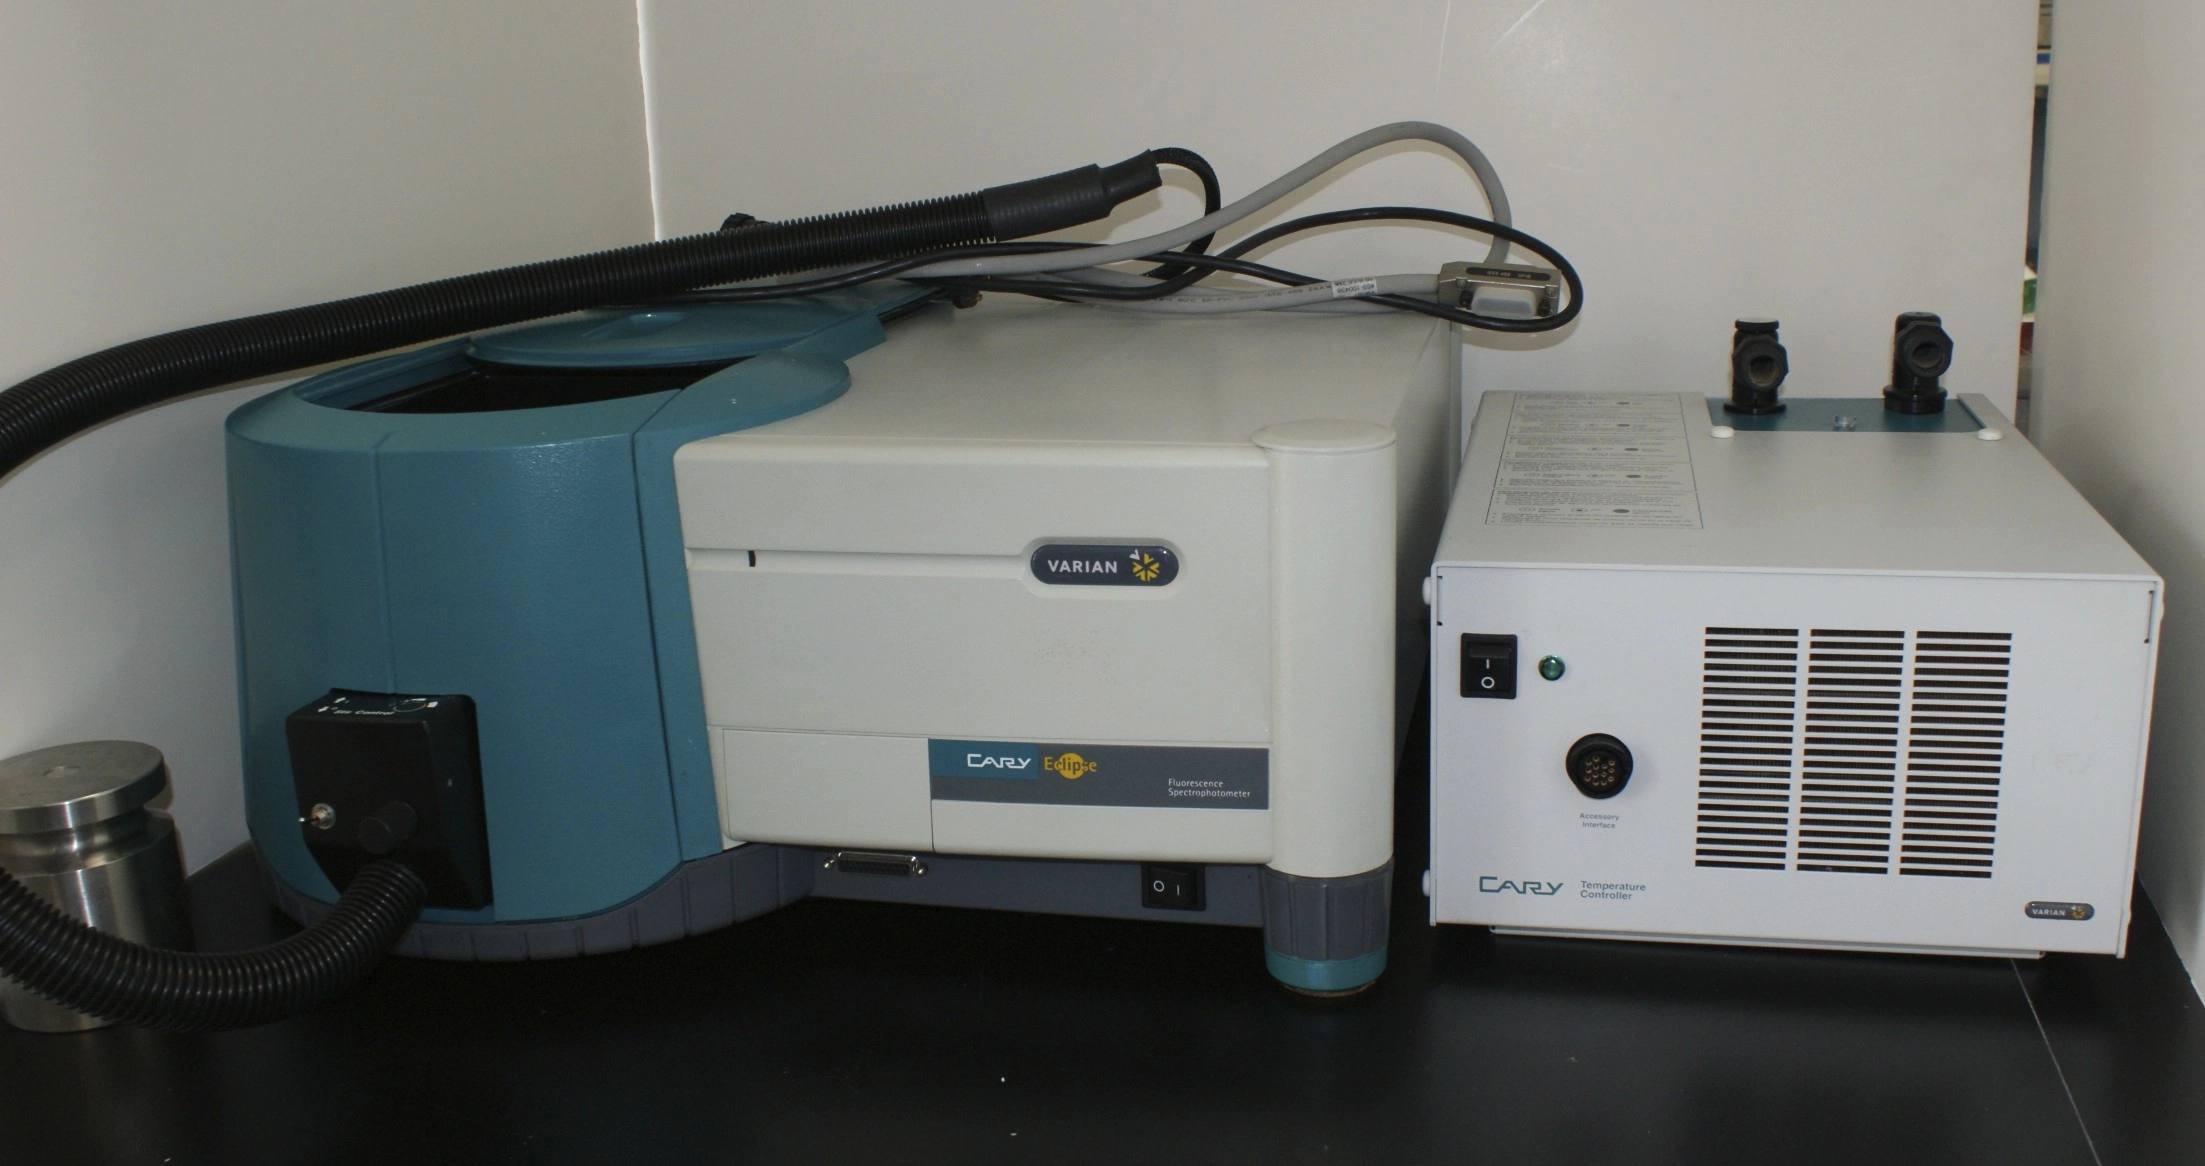 Varian Cary Eclipse Fluorescence spectrophotometer Varian Eclipse Fluorescence spectrophotometer with Varian temperature Cont